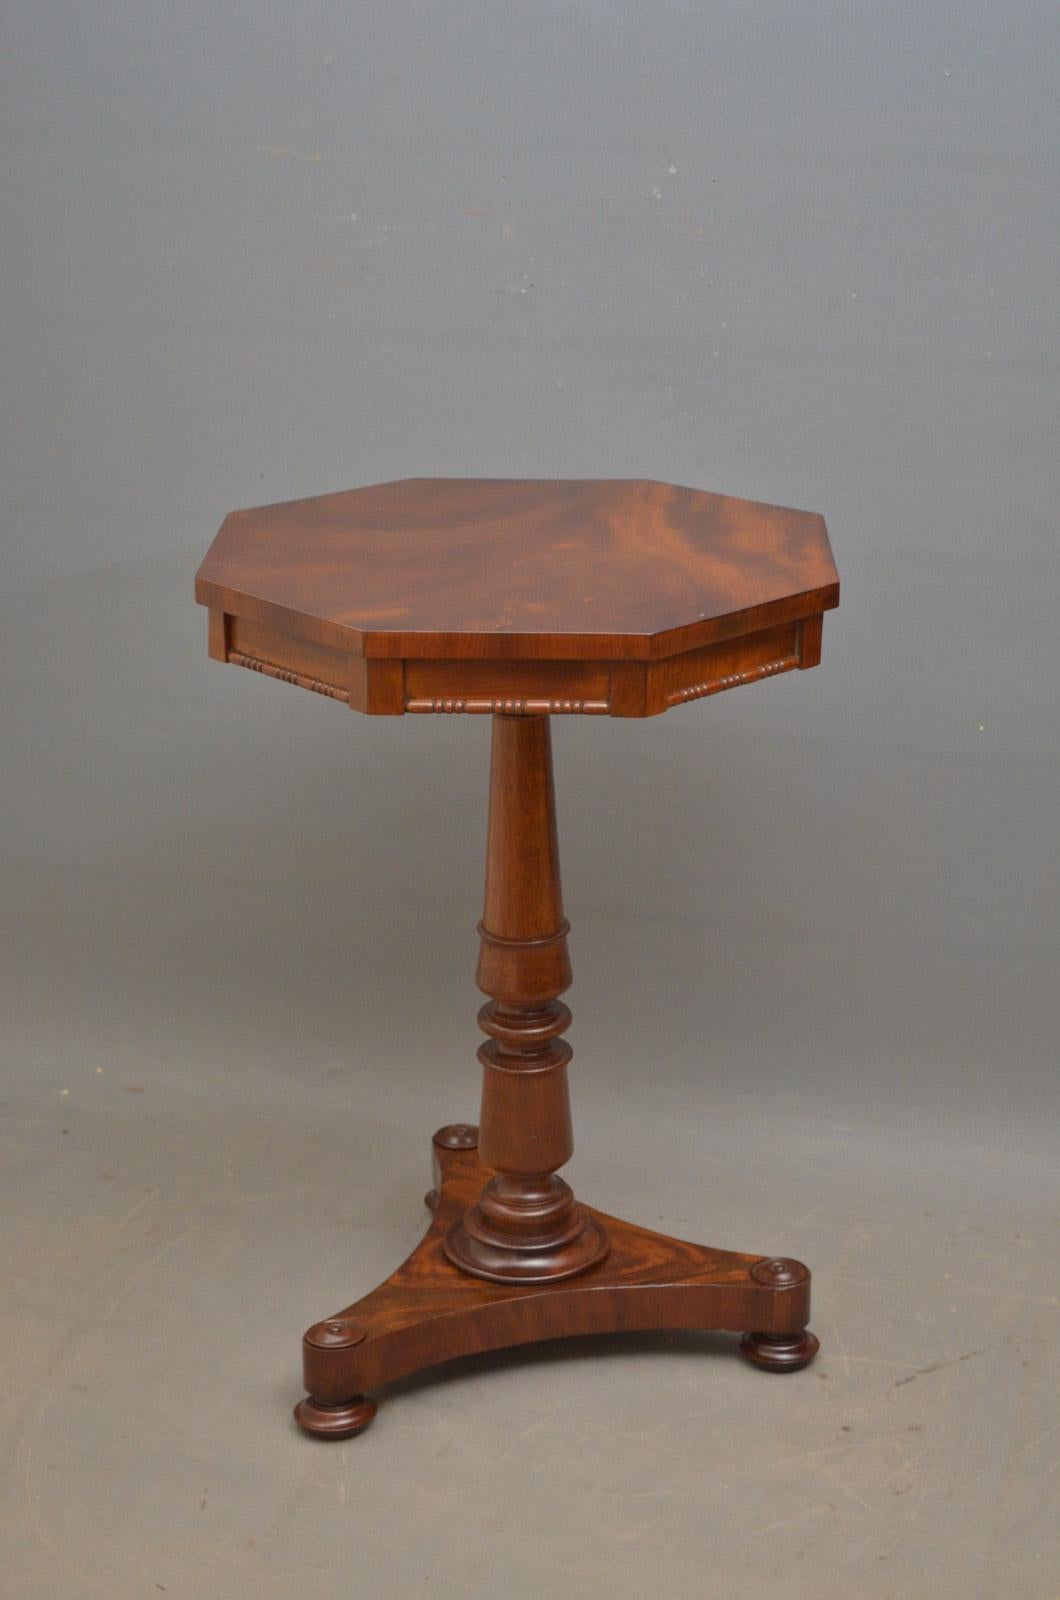 Sn4463, early Victorian side table, having flamed mahogany octagonal top with decorative carving below, standing on turned pedestal terminating in trefoil base and bun feet, all in home ready condition, circa 1850.
Measures: H 28.5